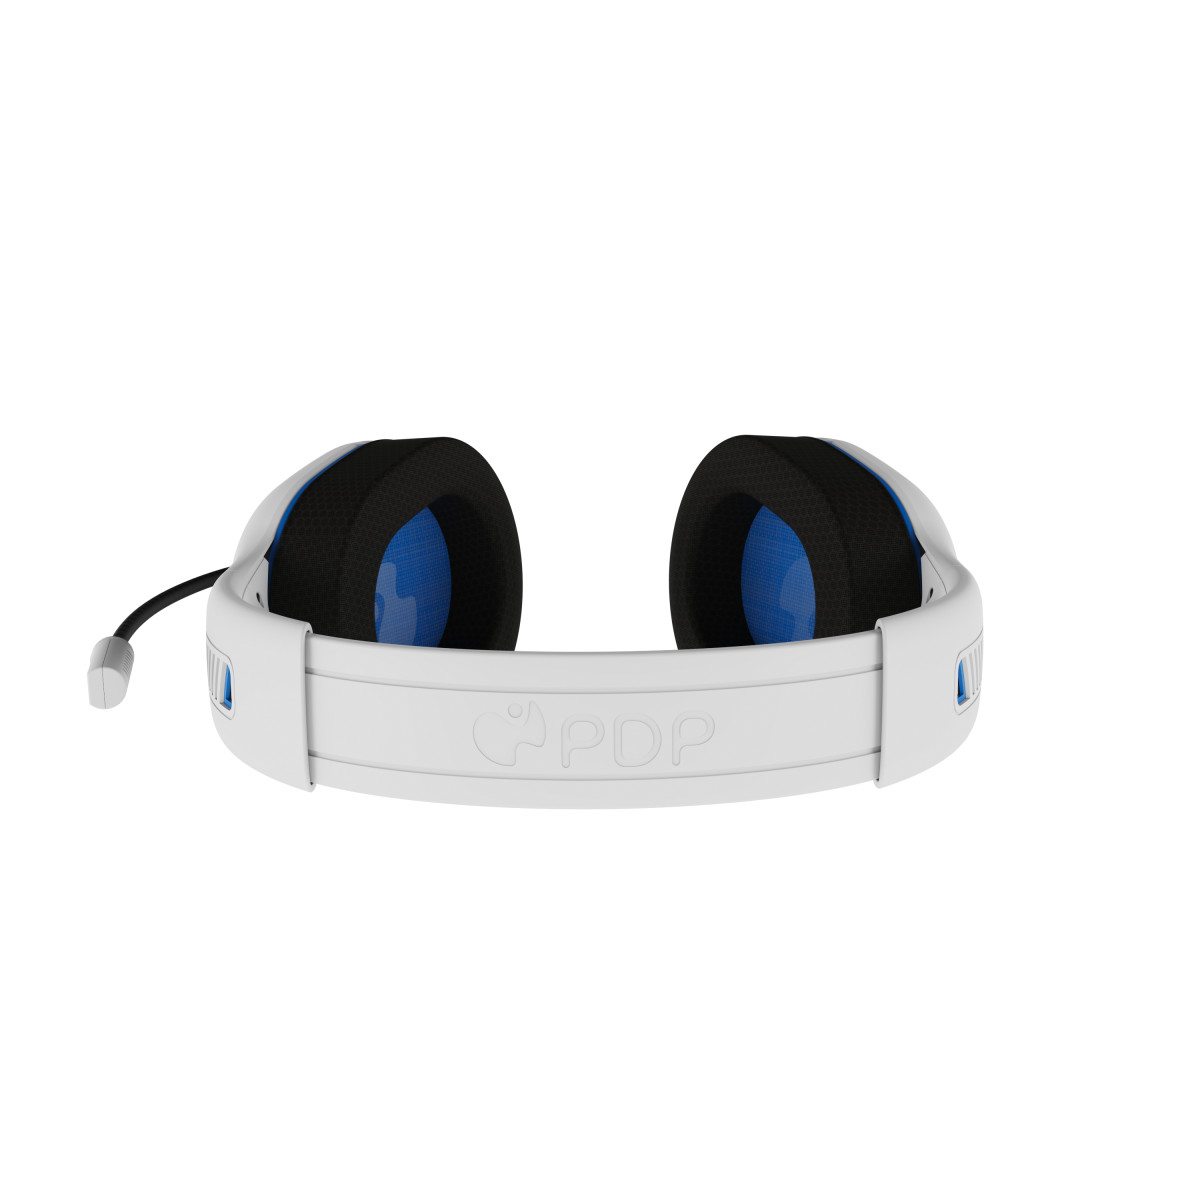 PS5 Airlite Pro Wireless Headset - White